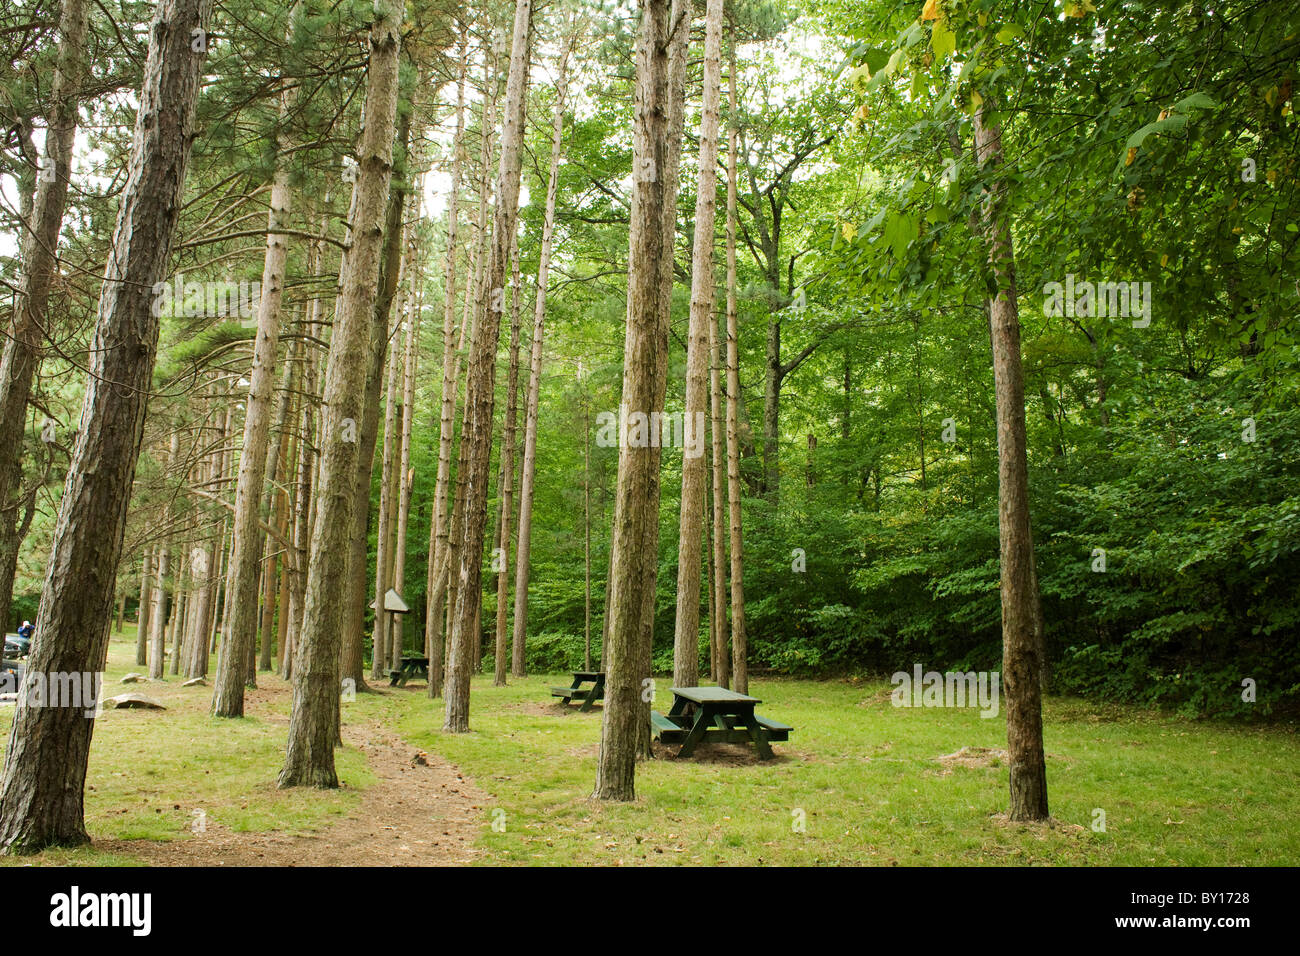 The entrance to Monument Mountain in Great Barrington, Massachusetts is an inviting glade of trees Trustees of Stock Photo